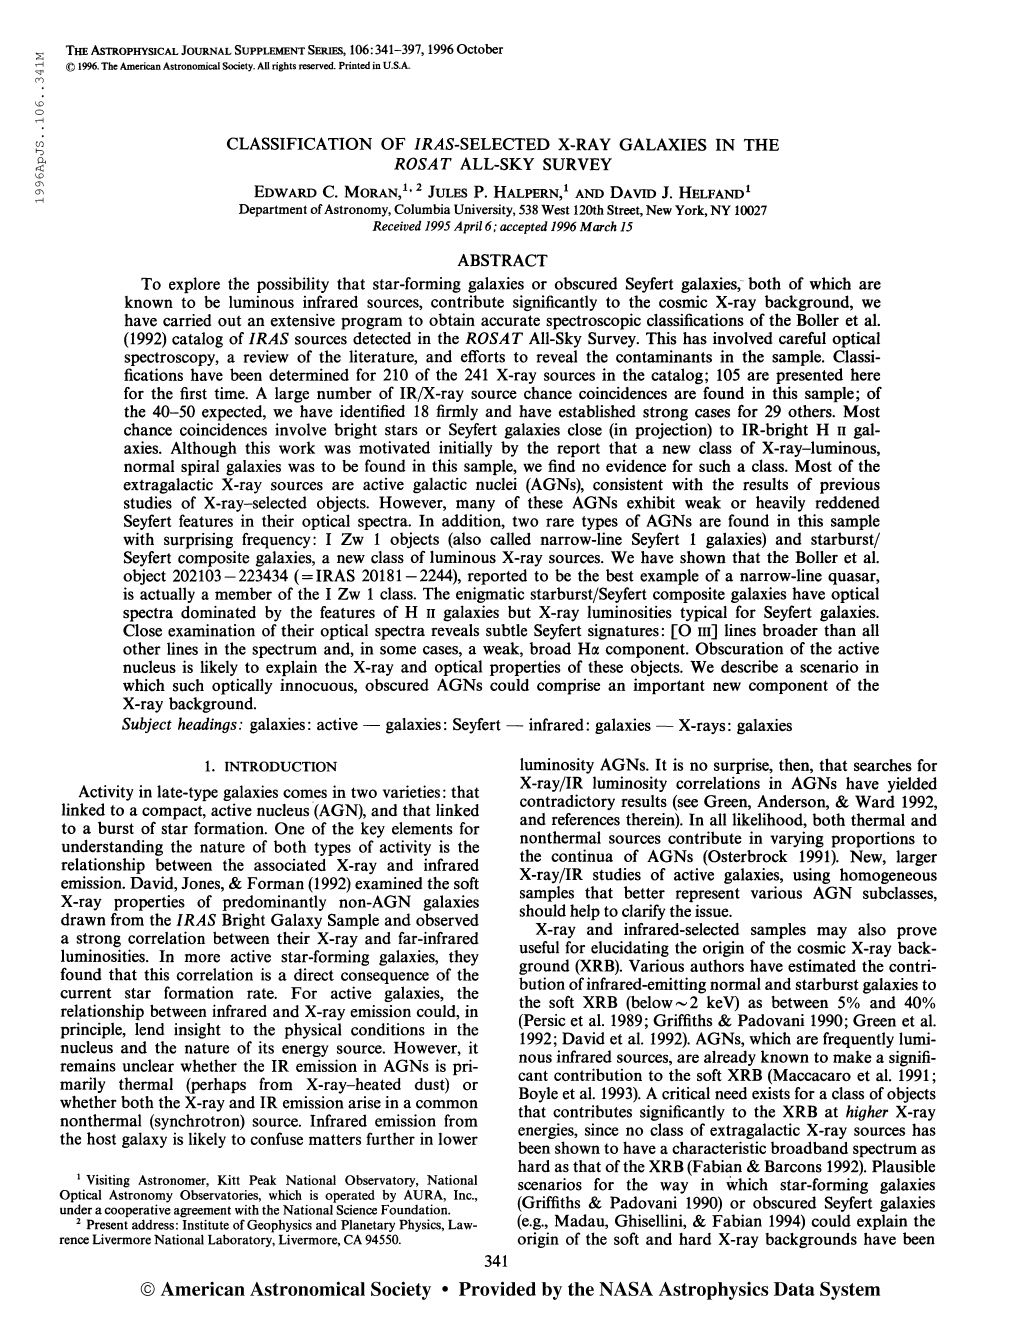 19 96Apjs. .106 . .341M the Astrophysical Journal Supplement Series, 106:341-397,1996 October © 1996. the American Astronomical